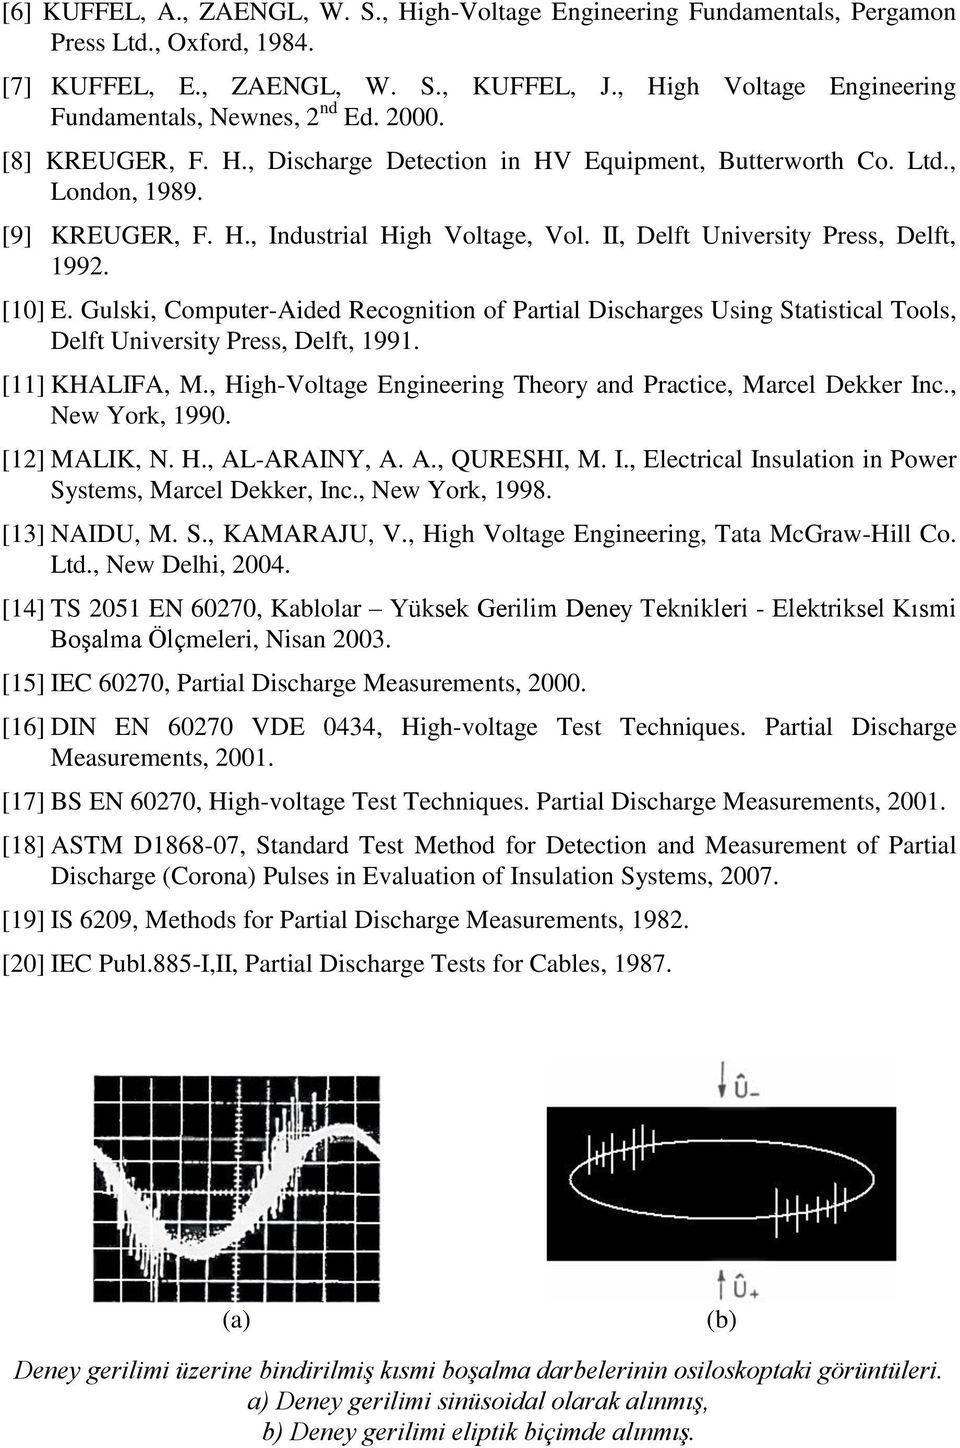 II, Delft University Press, Delft, 1992. [10] E. Gulski, Computer-Aided Recognition of Partial Discharges Using Statistical Tools, Delft University Press, Delft, 1991. [11] KHALIFA, M.